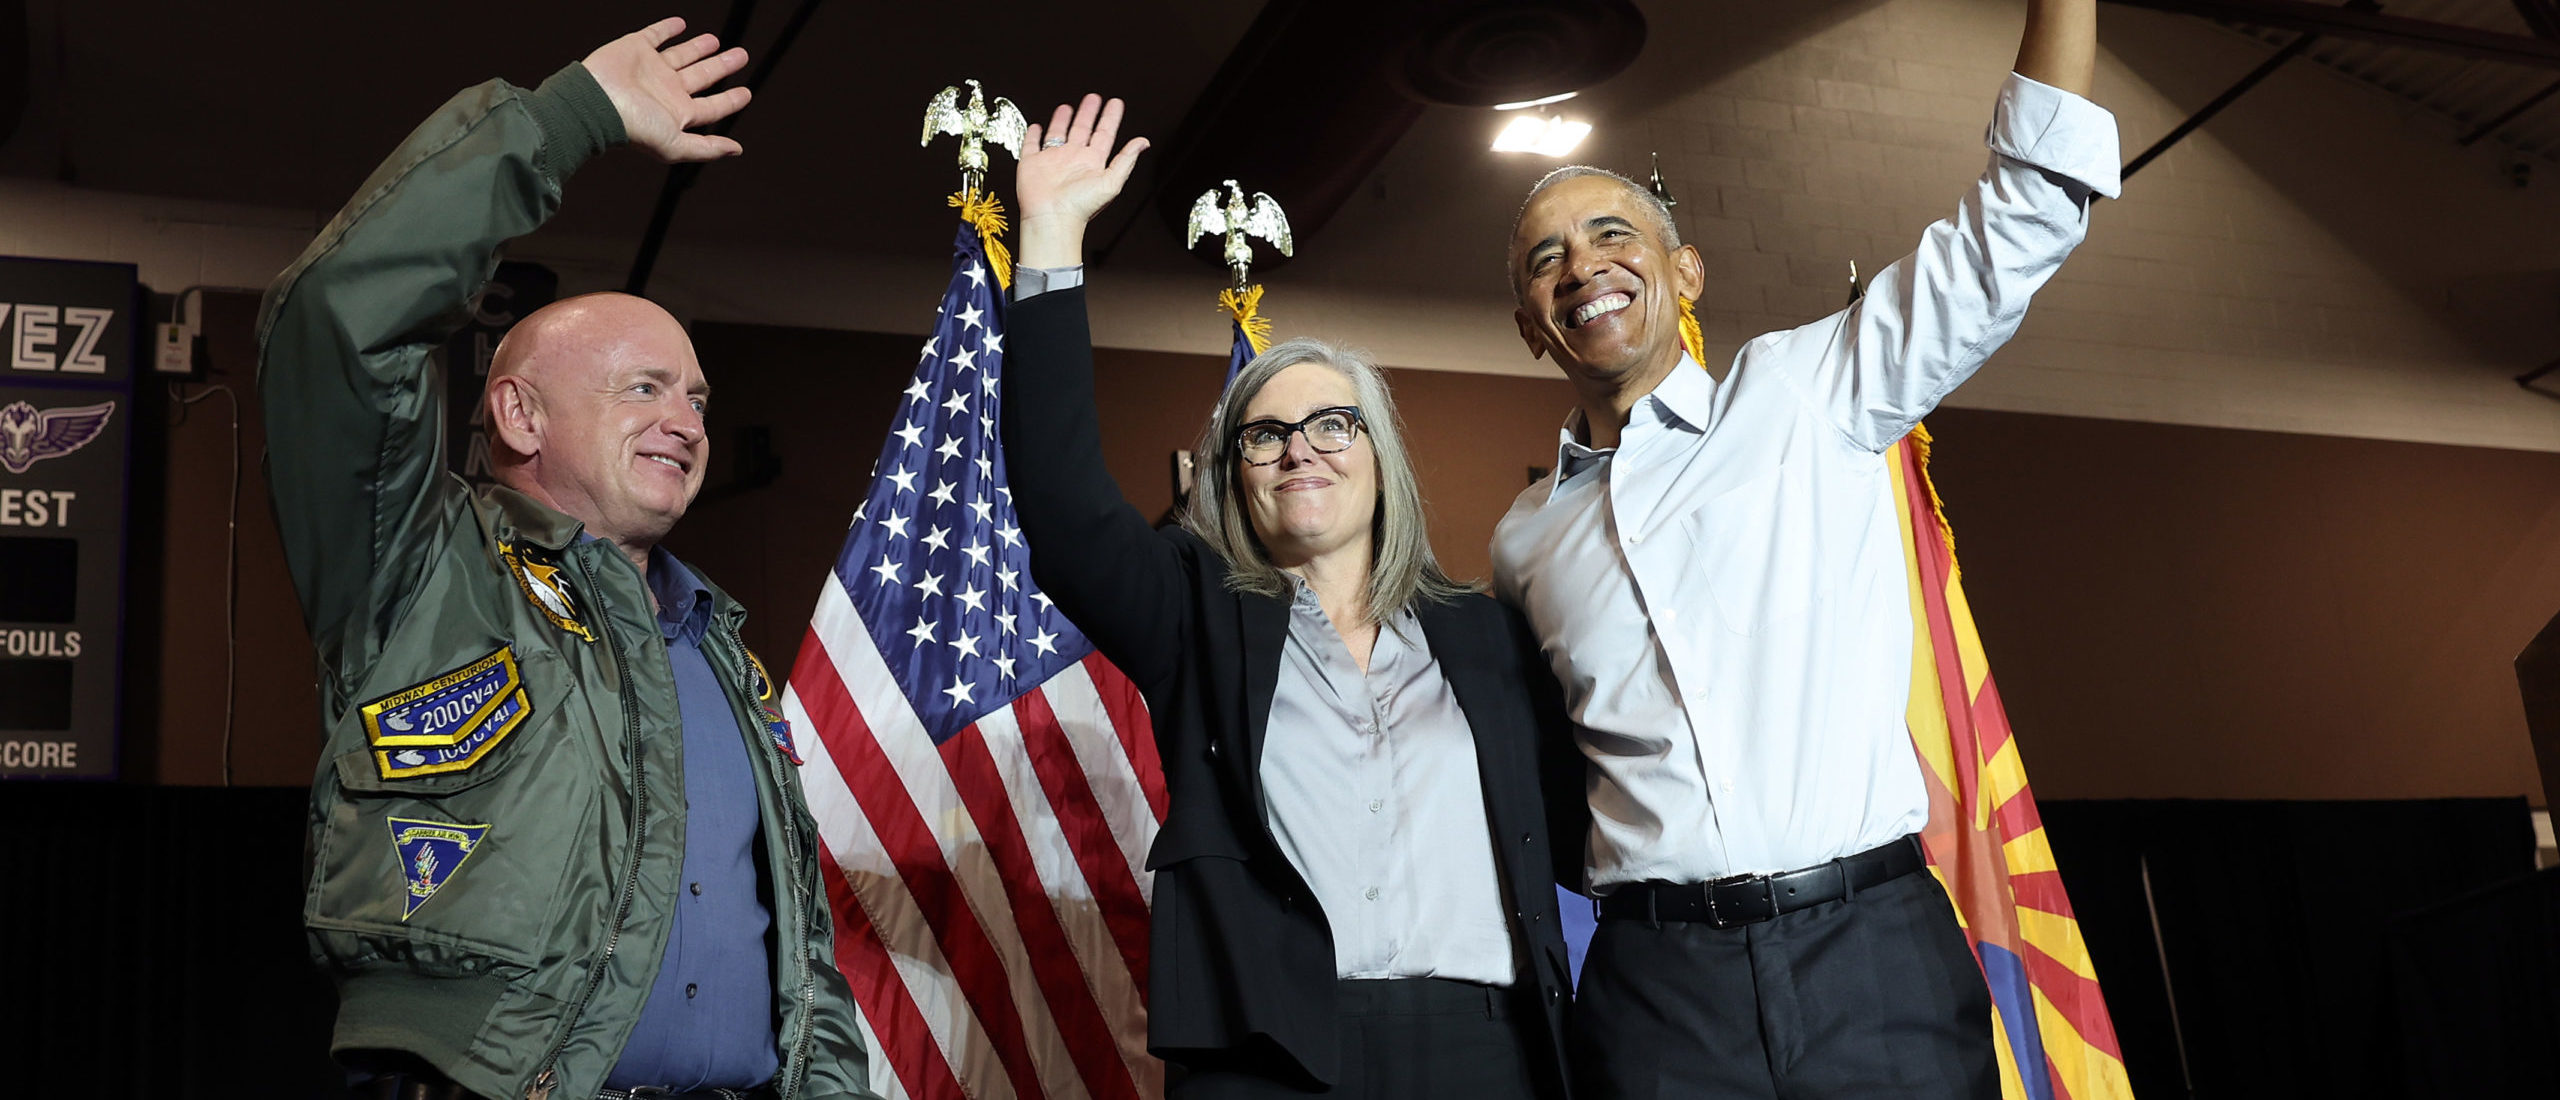 PHOENIX, ARIZONA - NOVEMBER 02: Former U.S. President Barack Obama campaigns with Sen. Mark Kelly (D-AZ) and Democratic Governor nominee Katie Hobbs at Cesar Chavez High School on November 02, 2022 in Phoenix, Arizona. Obama campaigned for a group of Arizona Democrats who are in very tight midterm races. (Photo by Kevin Dietsch/Getty Images)